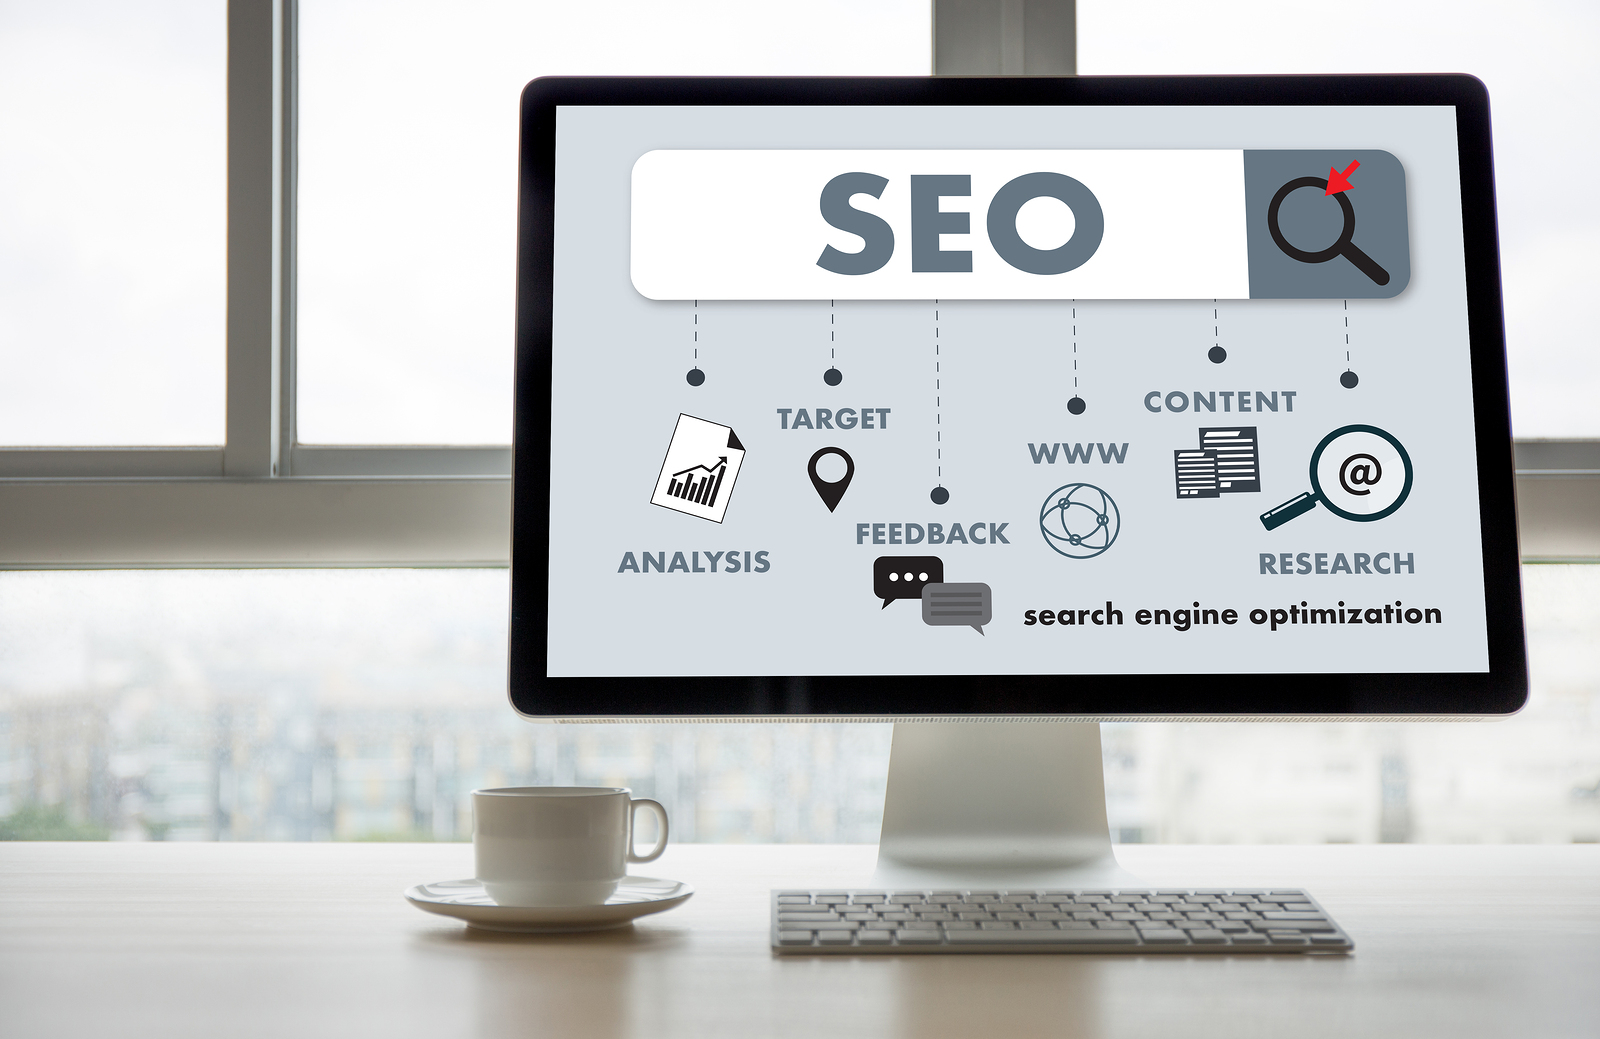 Best SEO Company Melbourne helps you in getting more traffic and business